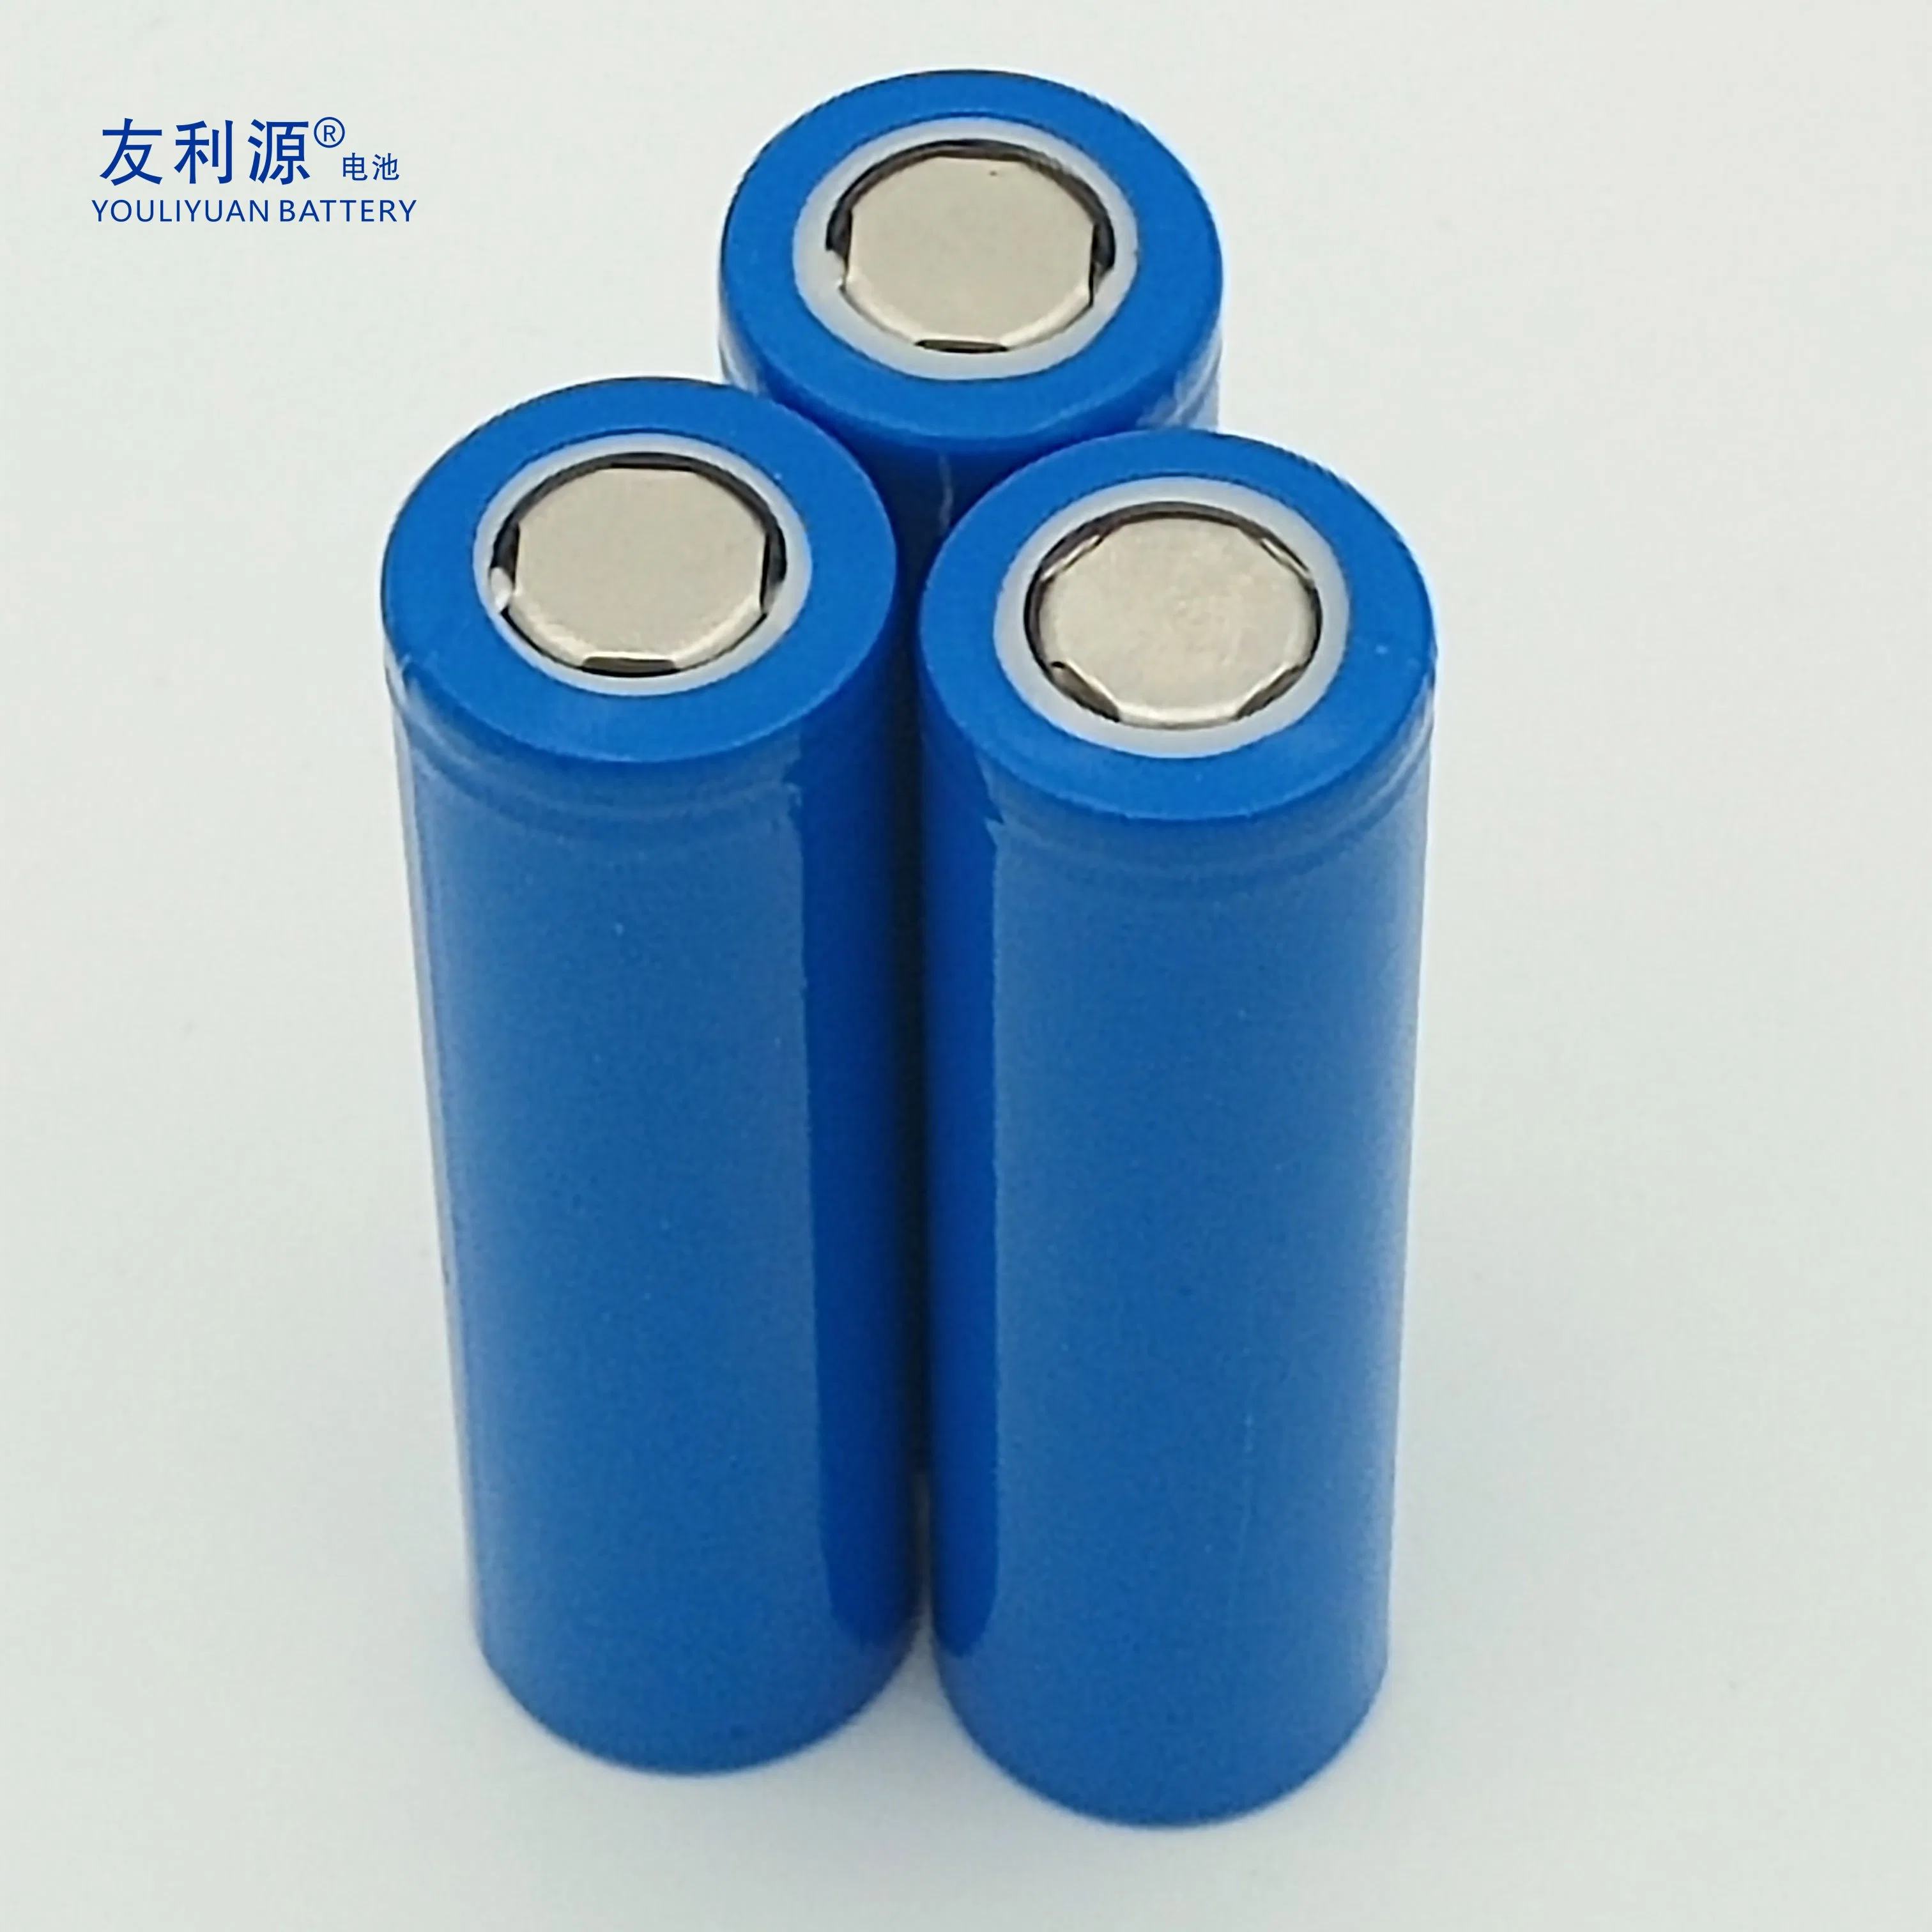 Factory Rechargeable 18650 Battery Cell 3.7V 1800mAh 6.66wh Lithium Battery with PCB and Cap for Massage Gun Battery